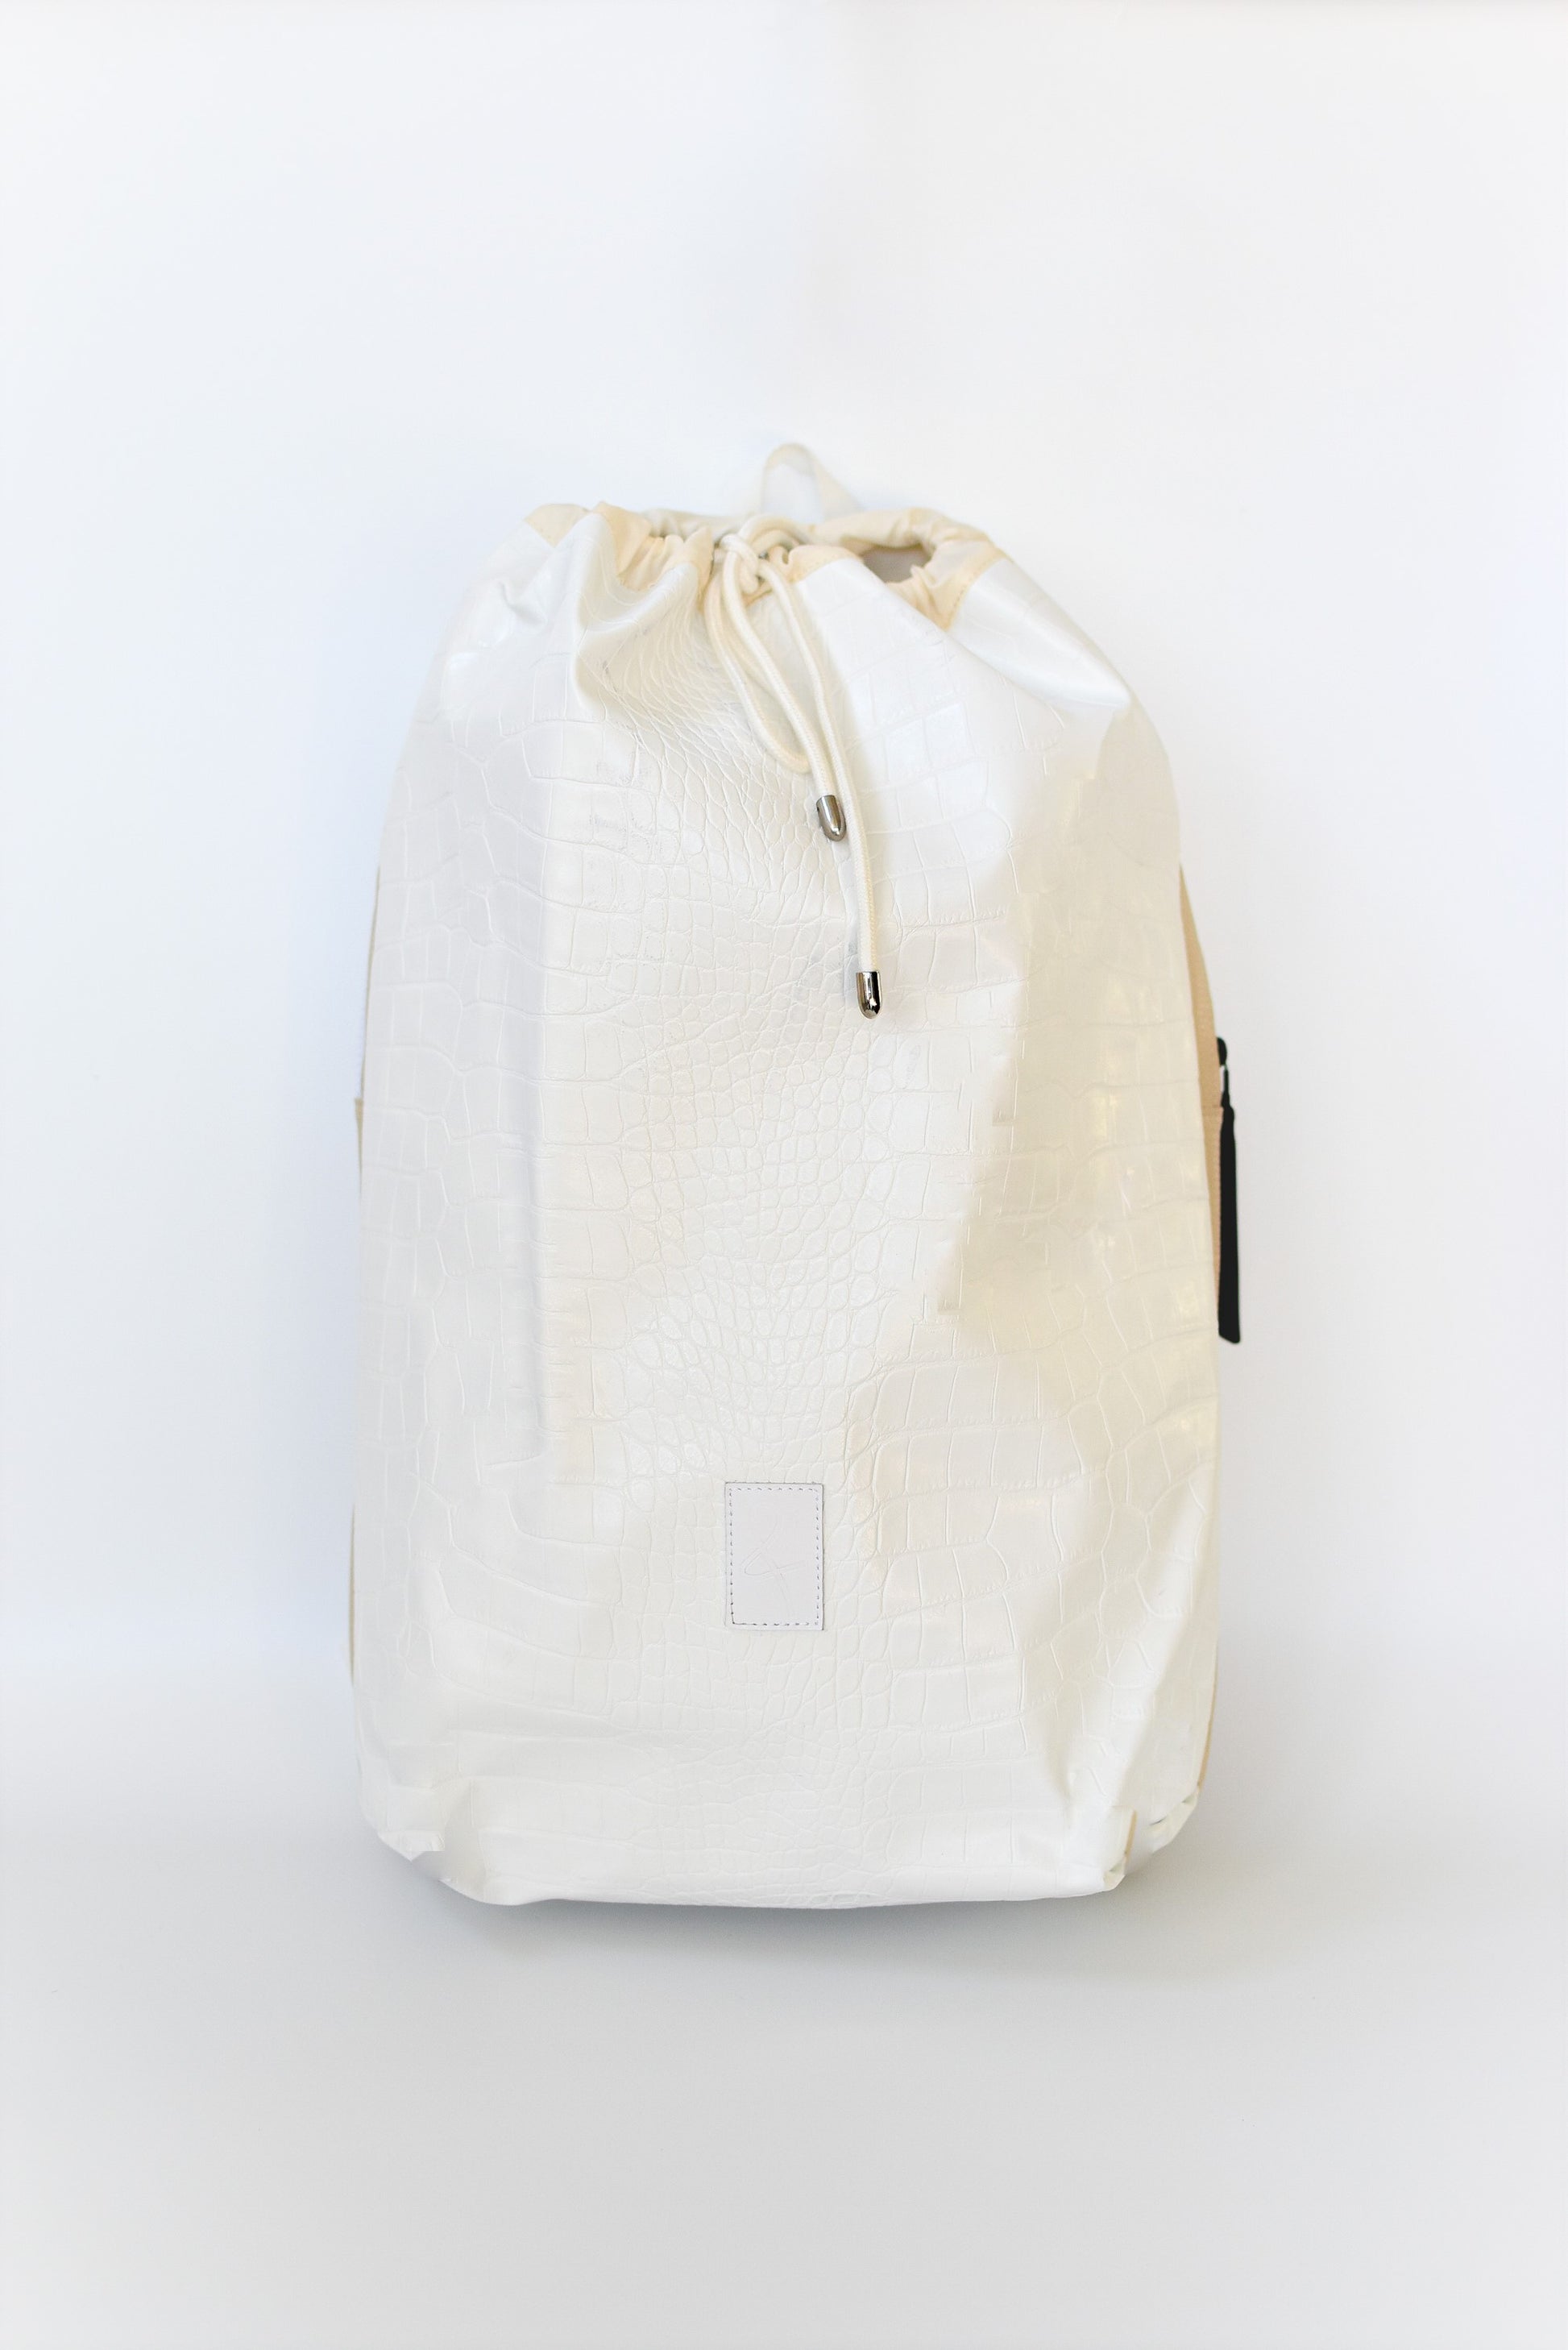 Off white faux croc embossed Casselberry backpack with cinch top and back zipper compartment.